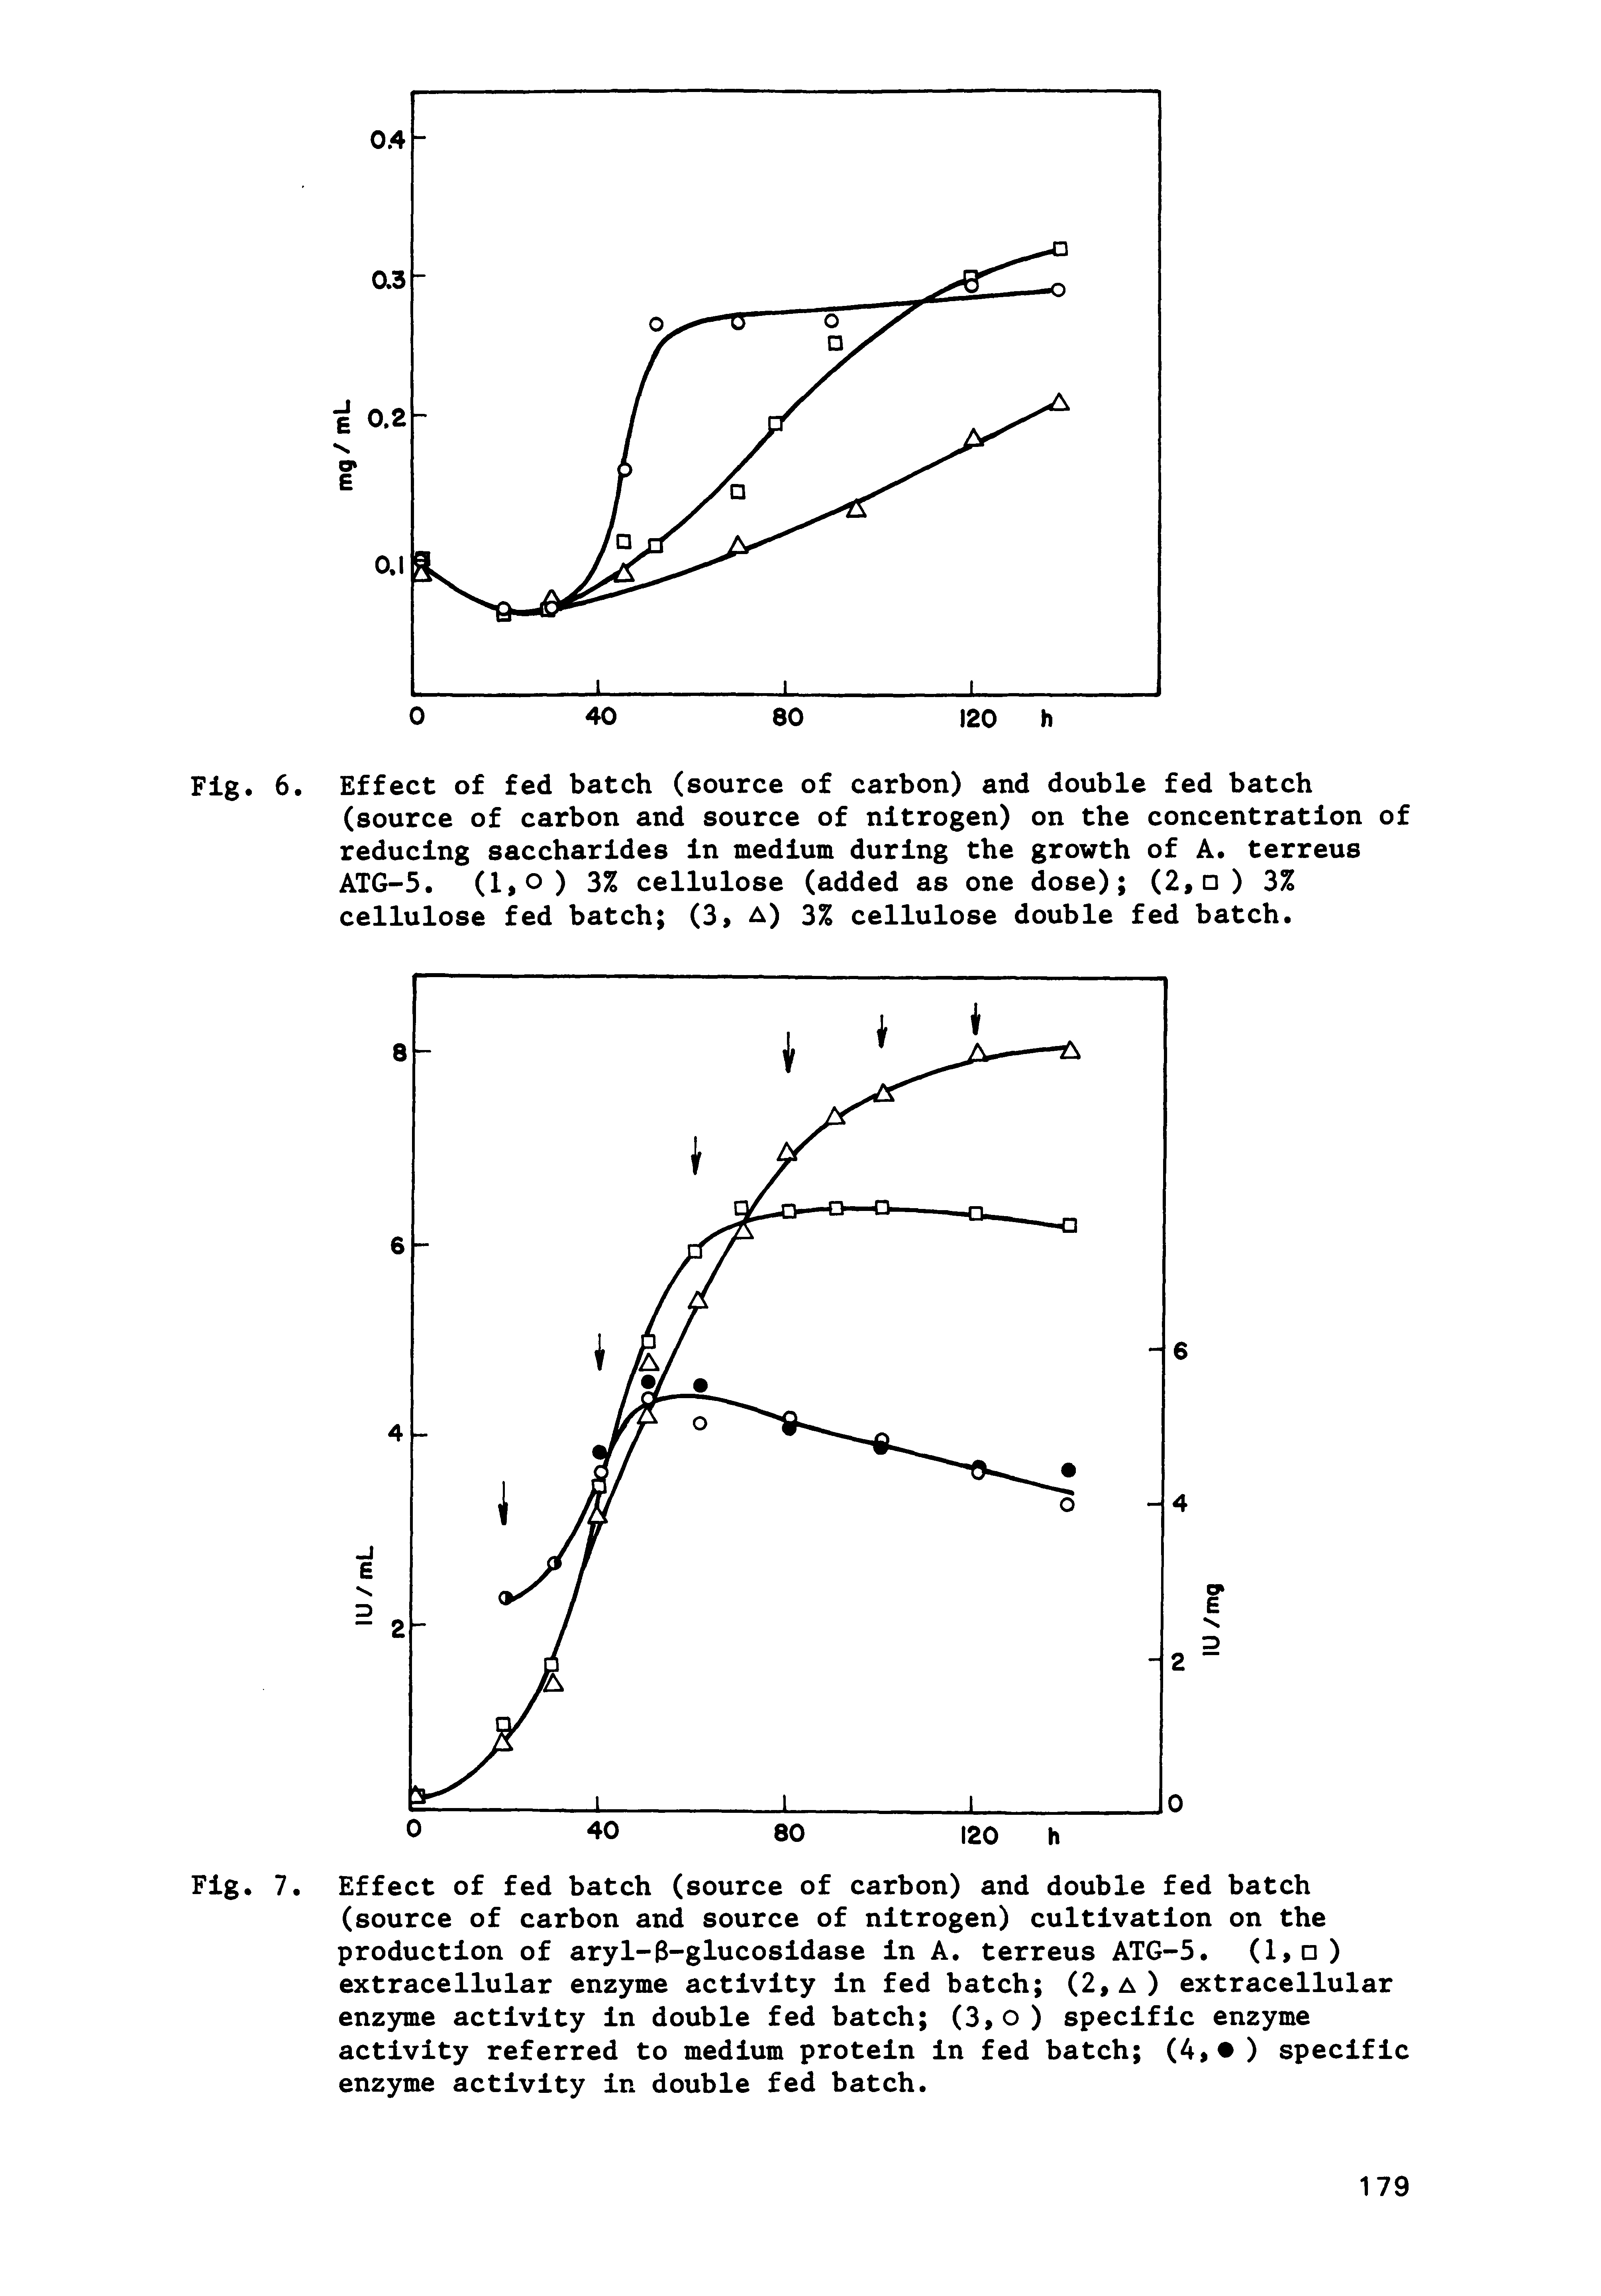 Fig. 7. Effect of fed batch (source of carbon) and double fed batch (source of carbon and source of nitrogen) cultivation on the production of aryl-3-glucosidase in A. terreus ATG-5. ( > ) extracellular enzyme activity in fed batch (2,a) extracellular enzyme activity in double fed batch (3,o) specific enzyme activity referred to medium protein in fed batch (4> ) specific enzyme activity in double fed batch.